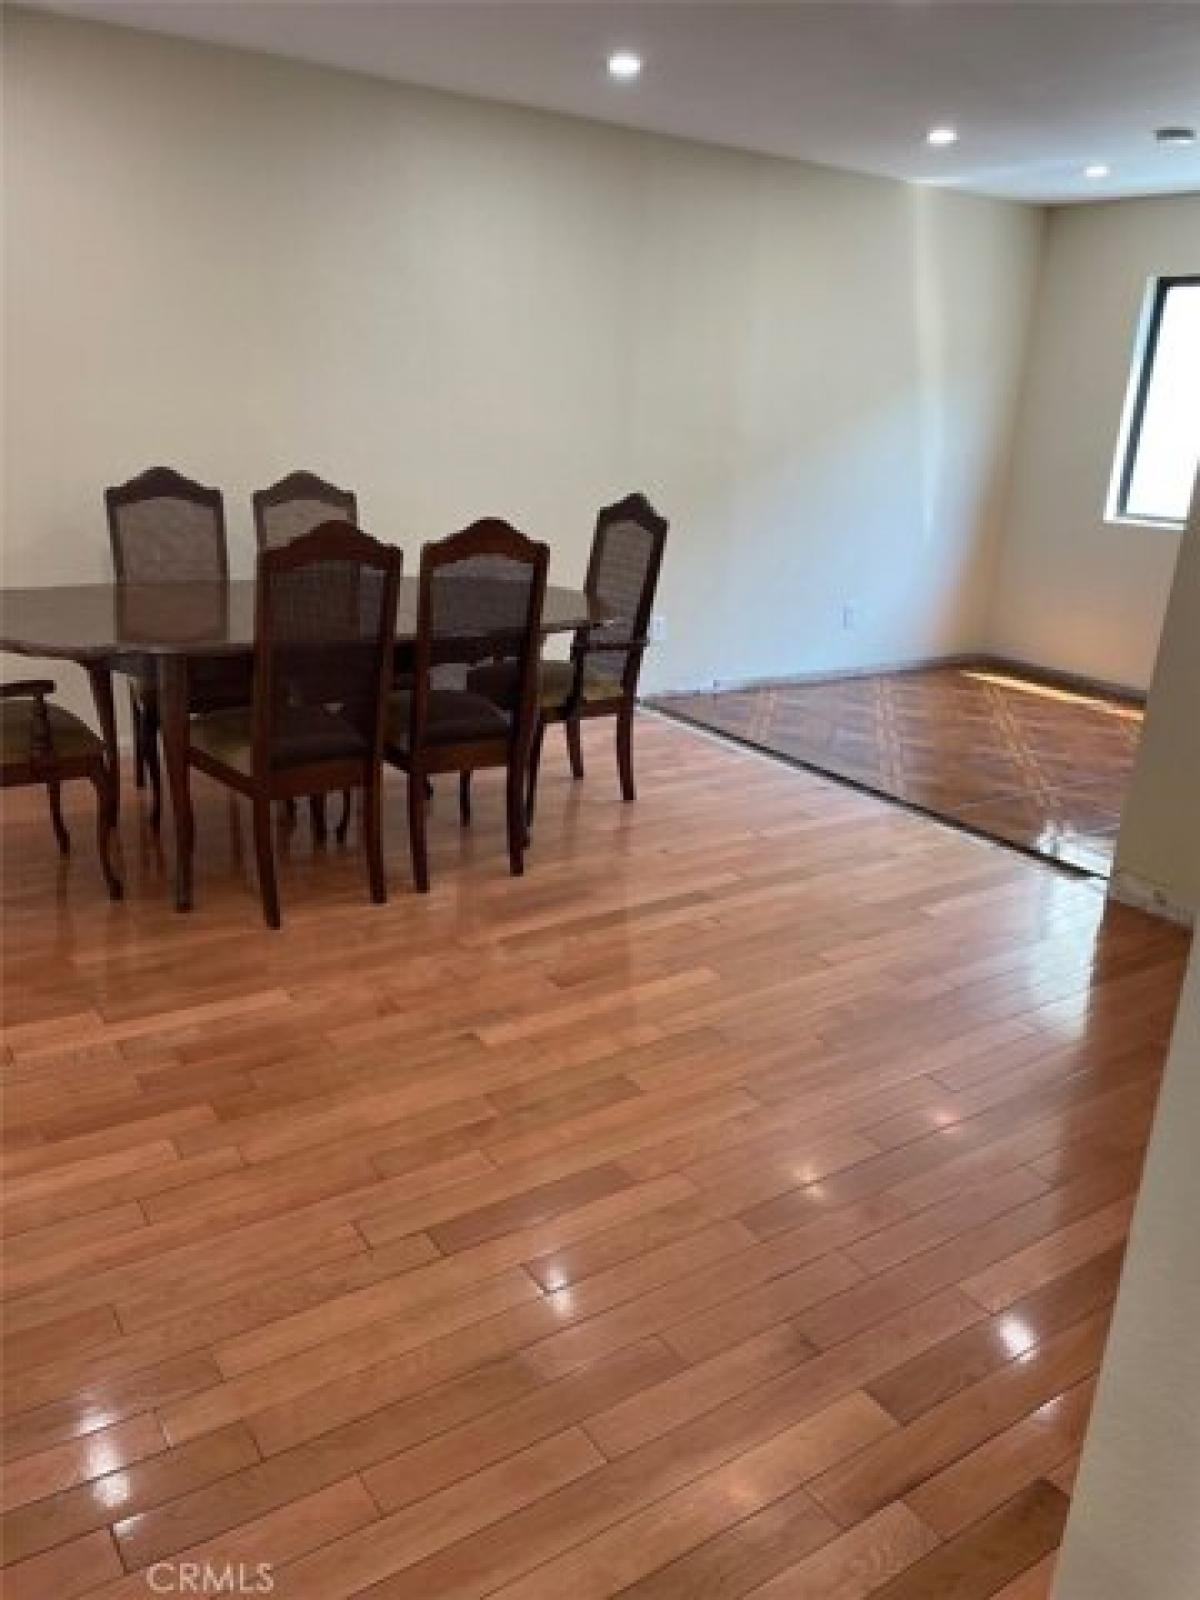 Picture of Home For Rent in Burbank, California, United States